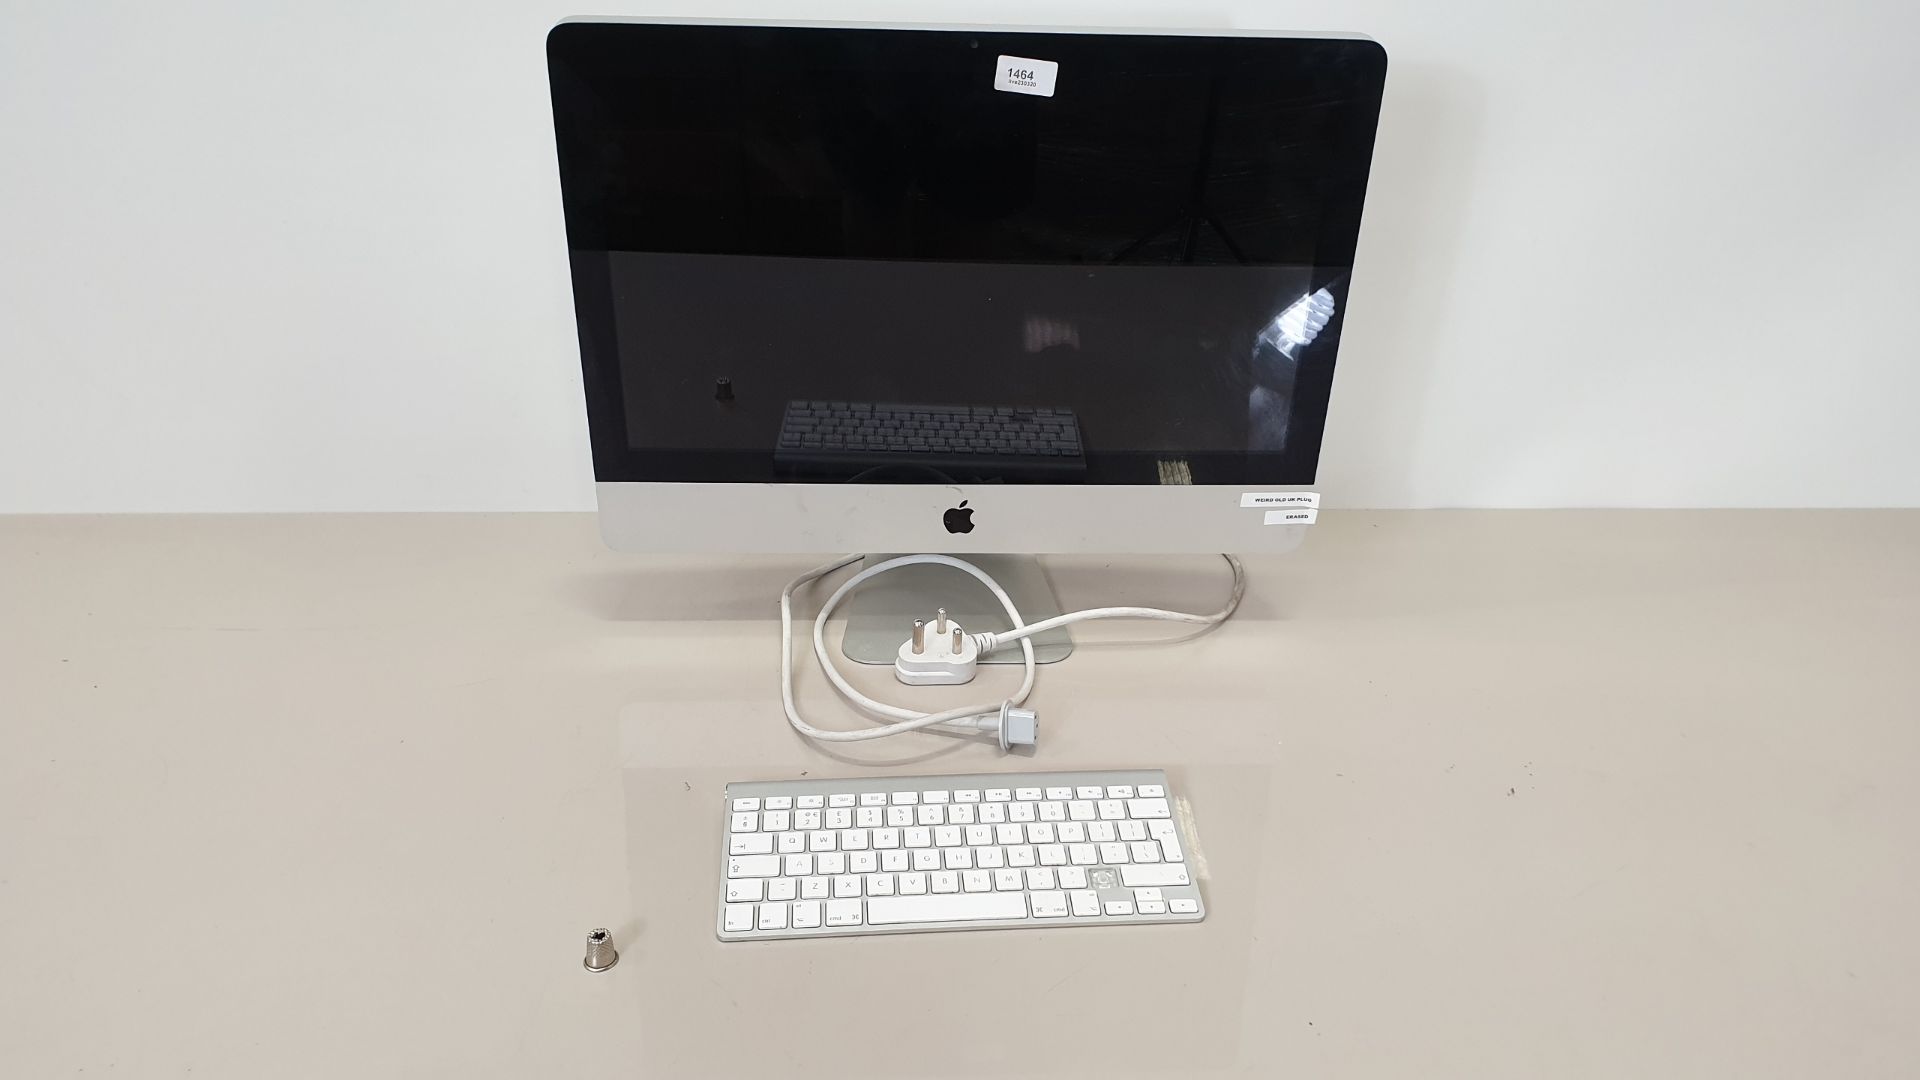 SILVER APPLE IMAC (MODEL - A1311) (SERIAL NUMBER - CO2GTK09DHJF) WITH APPLE KEYBOARD WITH MISSING